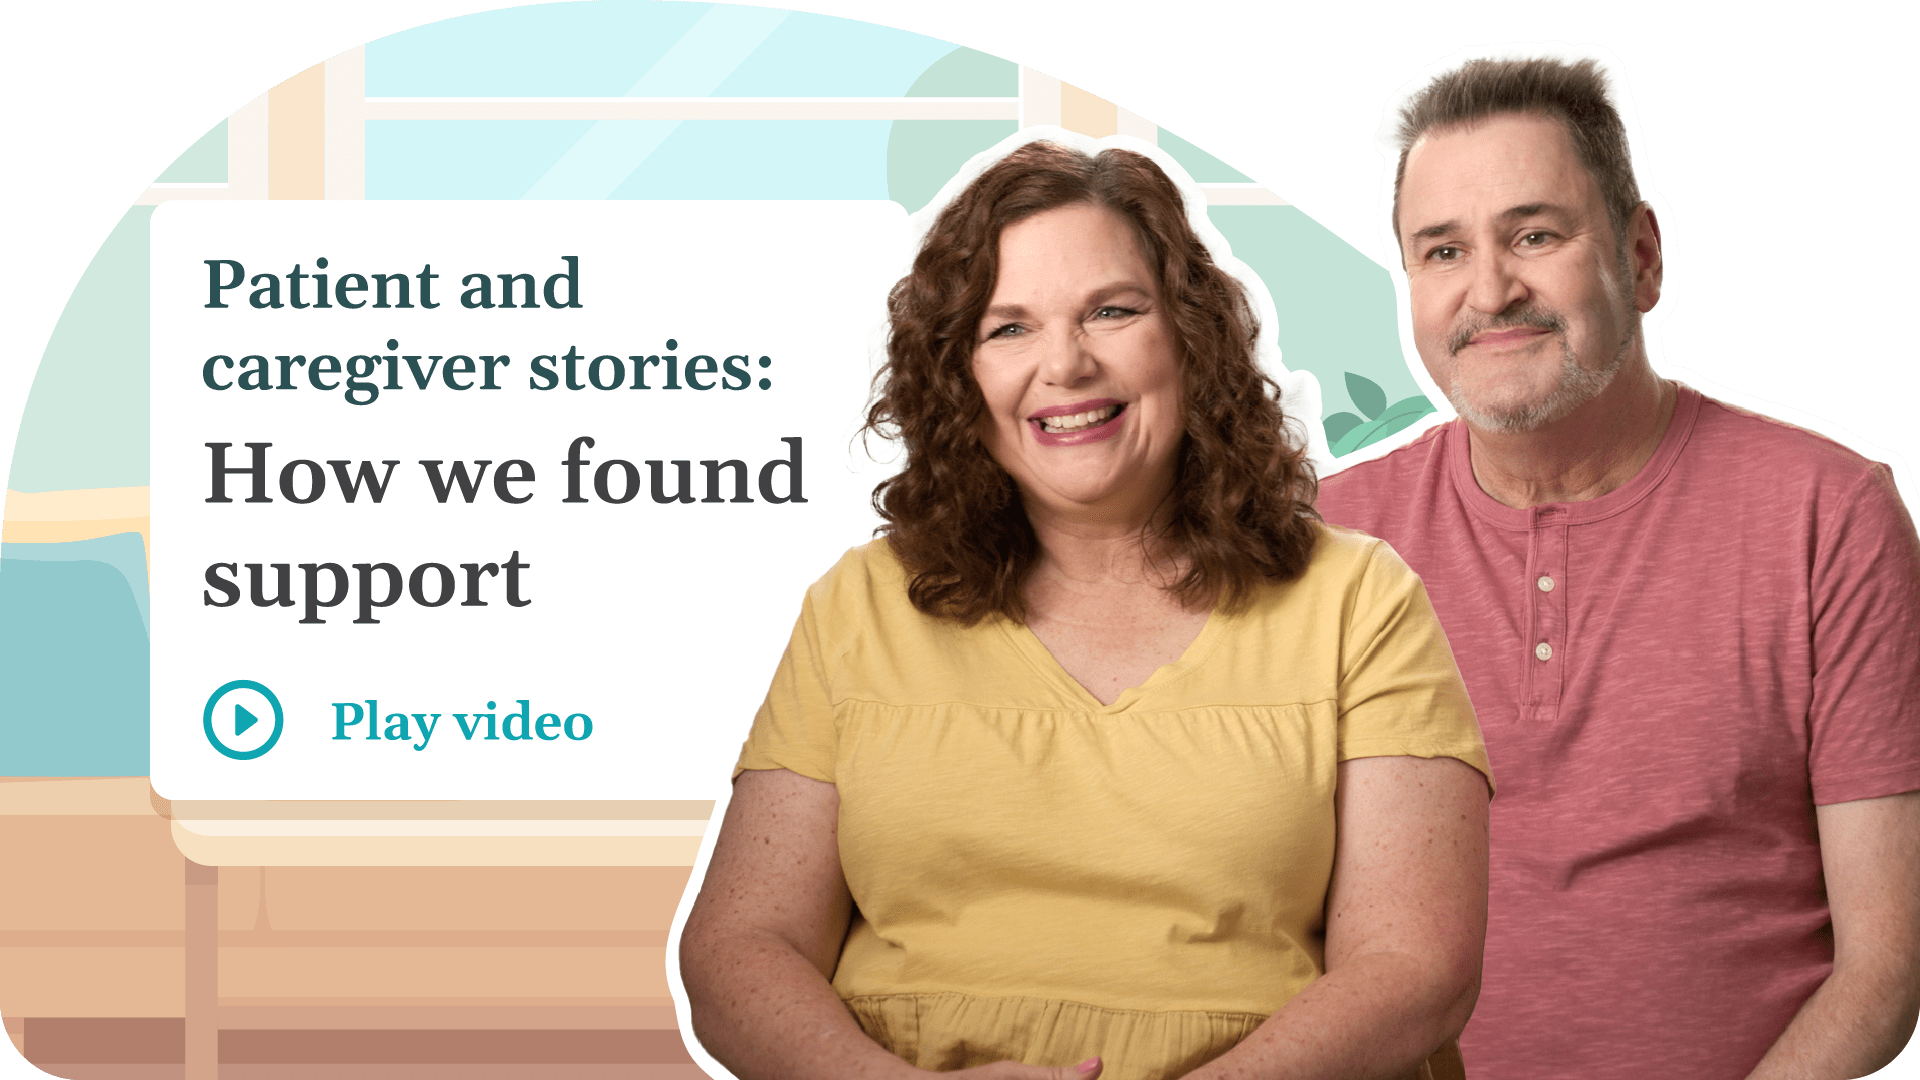 [Tap to play] Thumbnail for a video titled: Patient and caregiver stories: How we found support. 